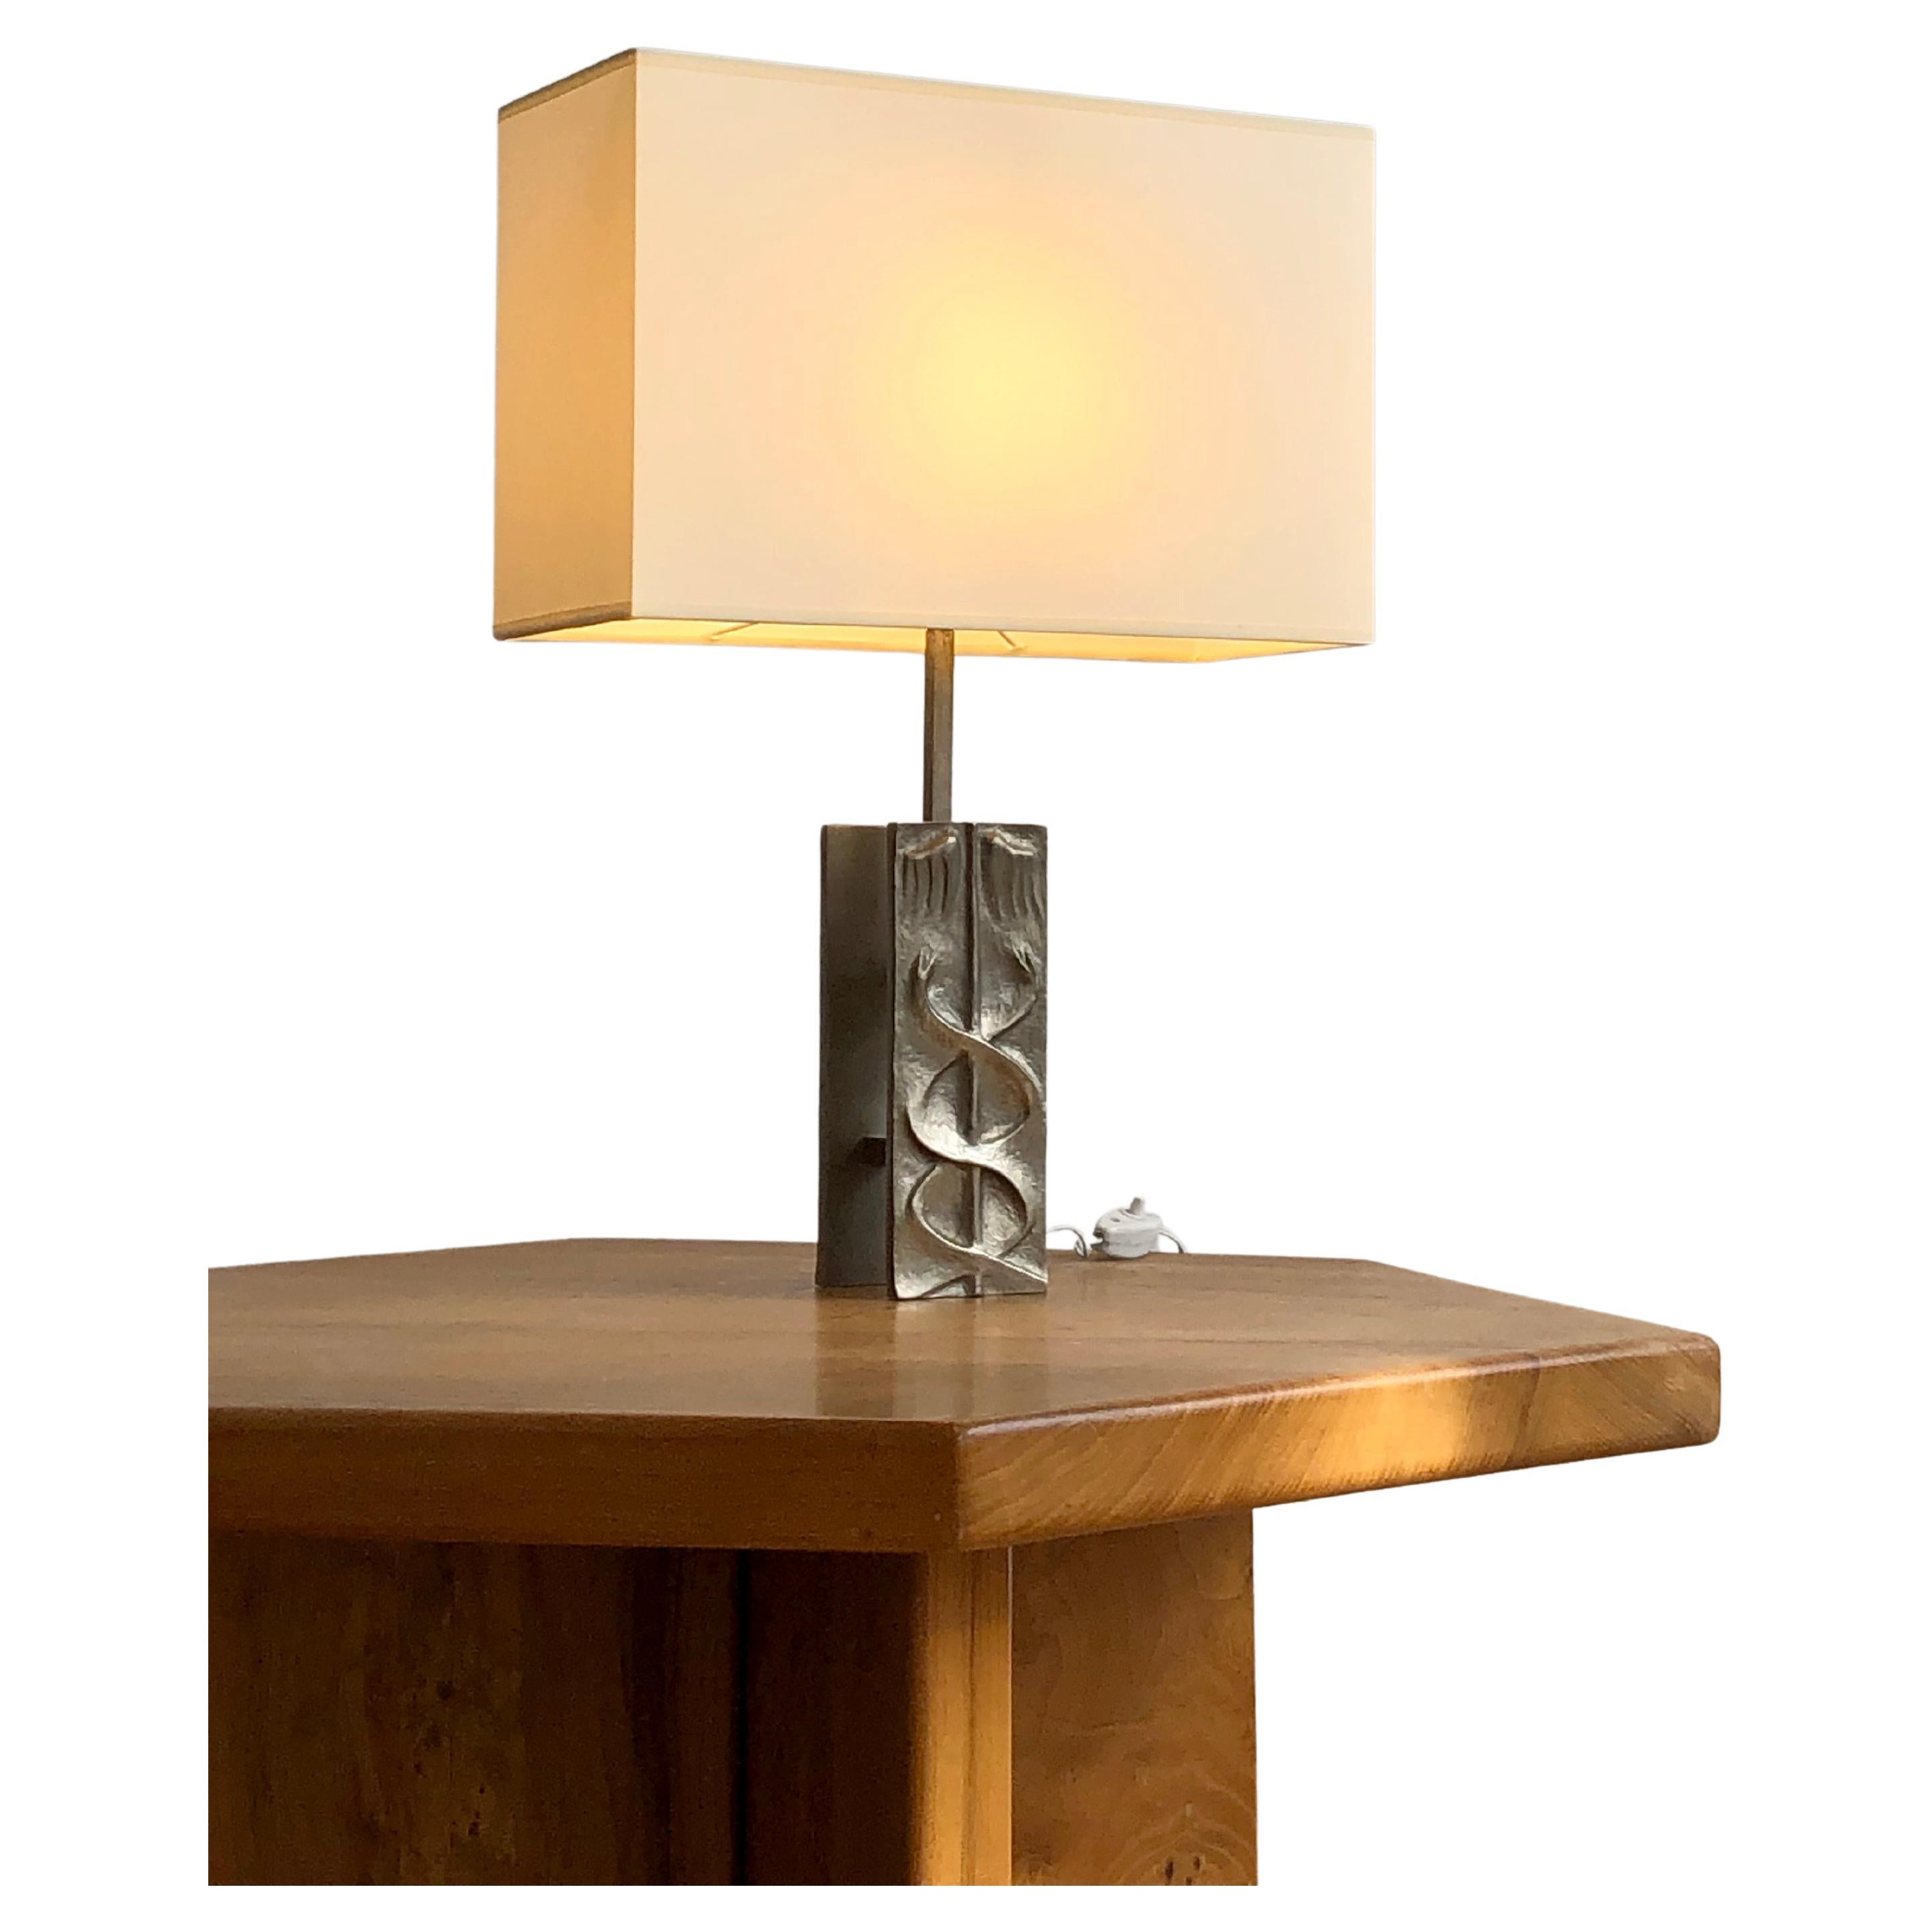 A beautiful, neo-classical, sculptural Table Lamp, double nickeled bronze base with snakes reliefs, square nickeled metal structure with a simple rectangular shade, attributed to Fondica, France 1990.

SOLD WITH OR WITHOUT LAMPSHADE.
A SALE WITHOUT